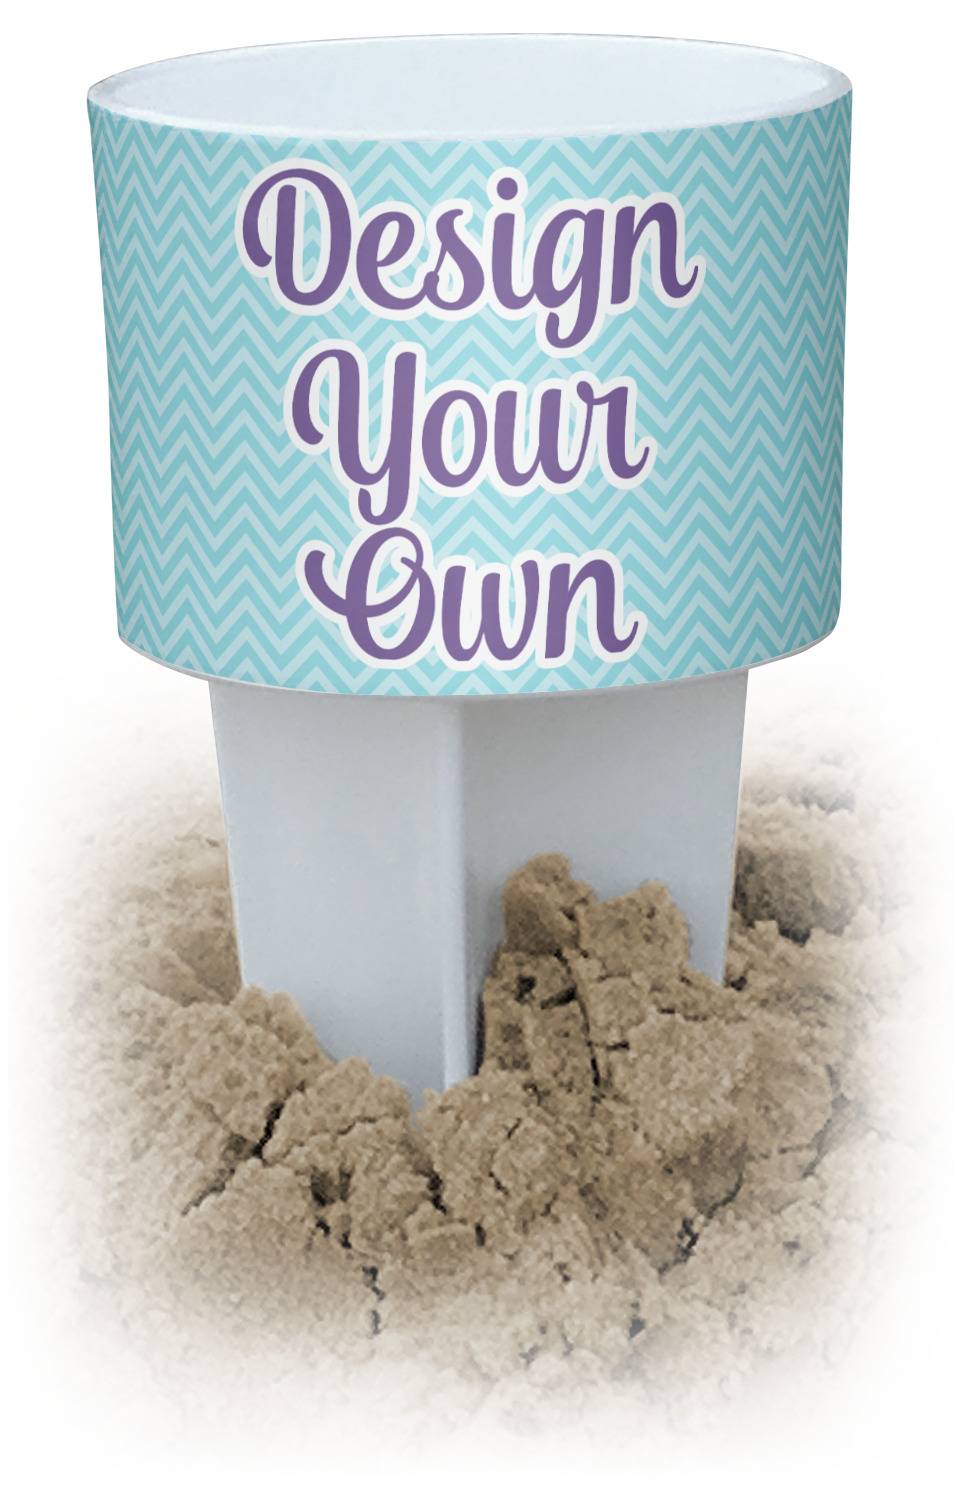 How To Make Your Own Tumbler Cup Holder